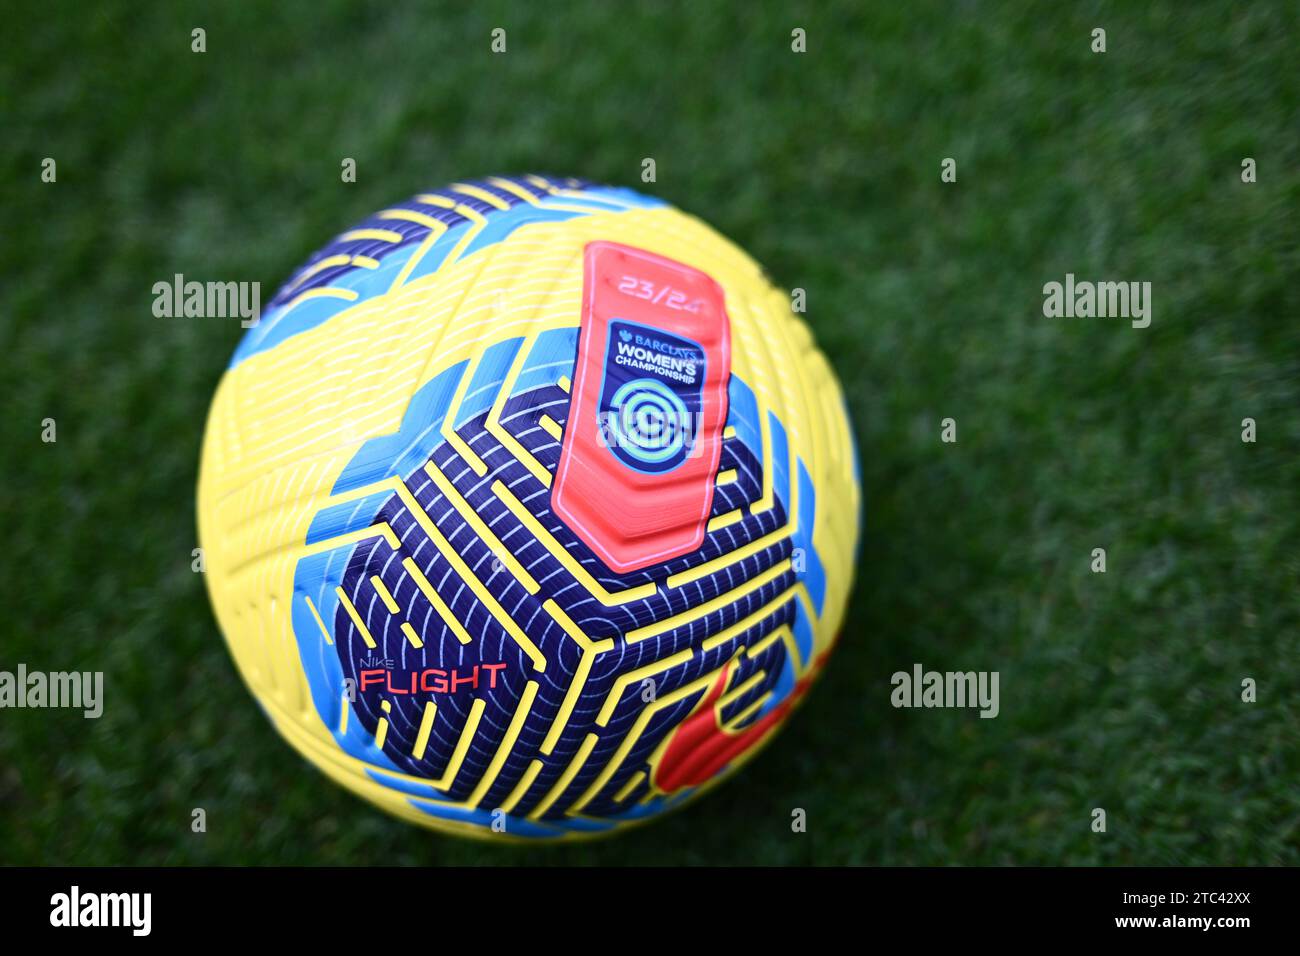 England, London 19 November 2023 - official Womens Championship Nike match day ball close up during the Womens Championship match between Crystal Pala Stock Photo